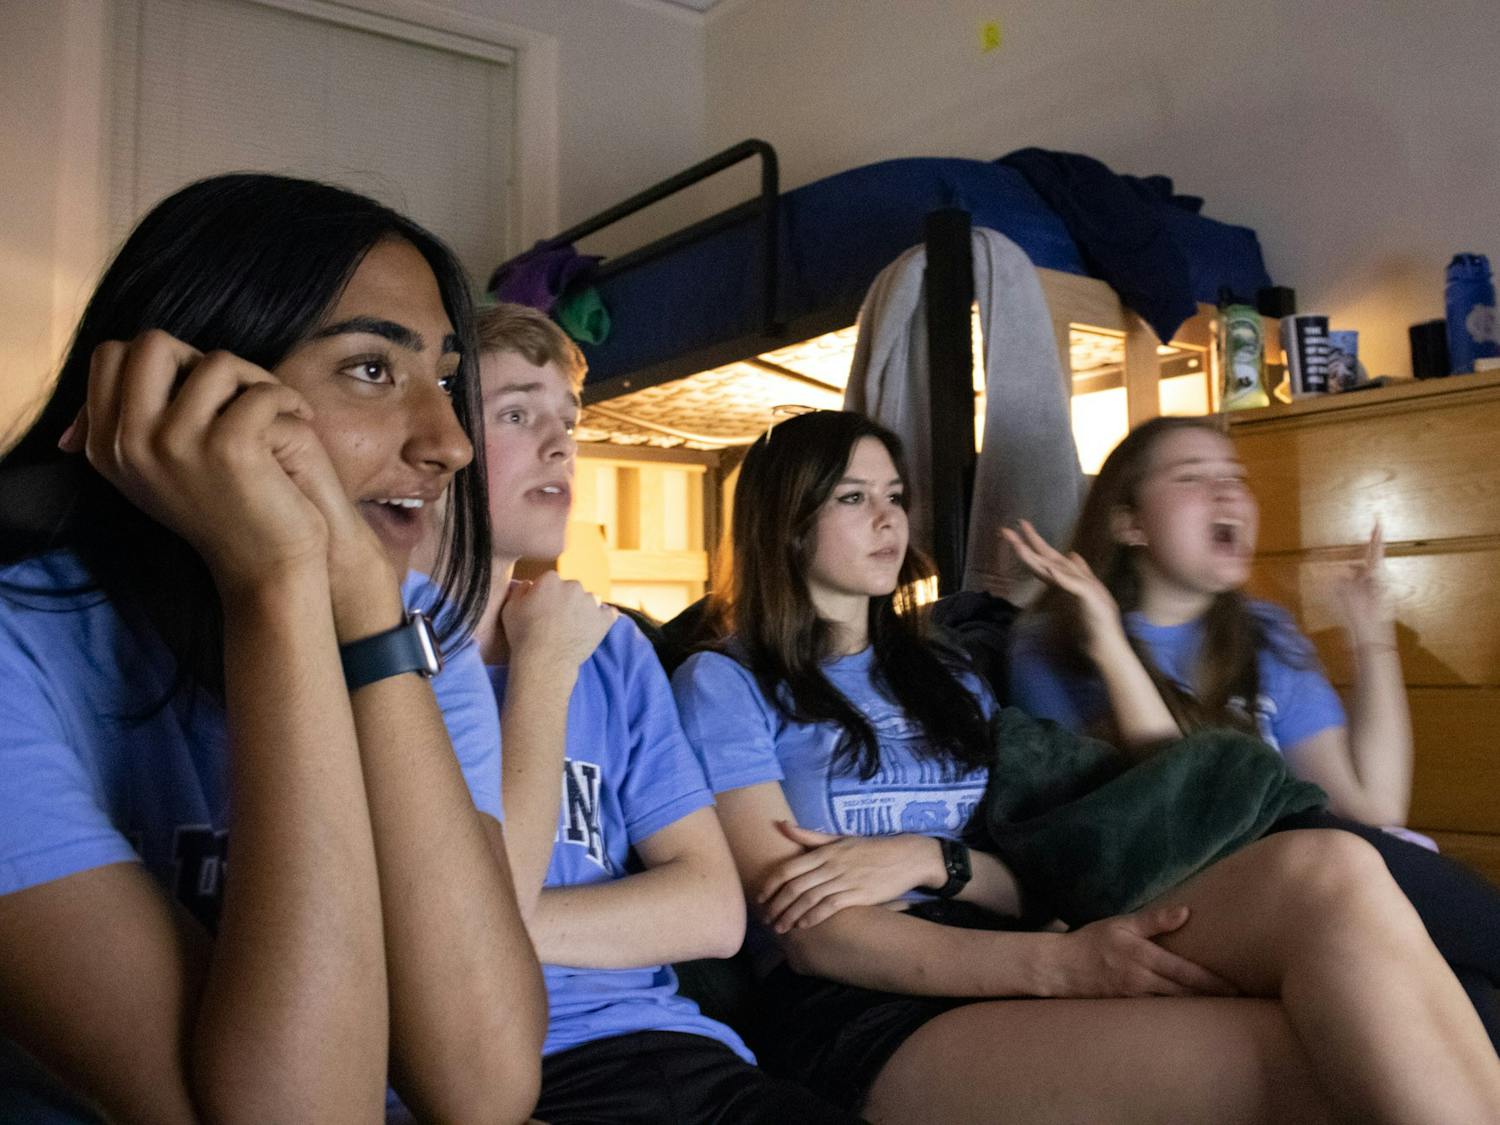 UNC Freshmen (from left to right) Nikita Umesh, Austin Foushee, Sayde Friedman, and Celia Gibbs watch the NCAA Basketball Final Game between UNC and Kansas in Alexander Residential Hall on Monday, April 4 2022.